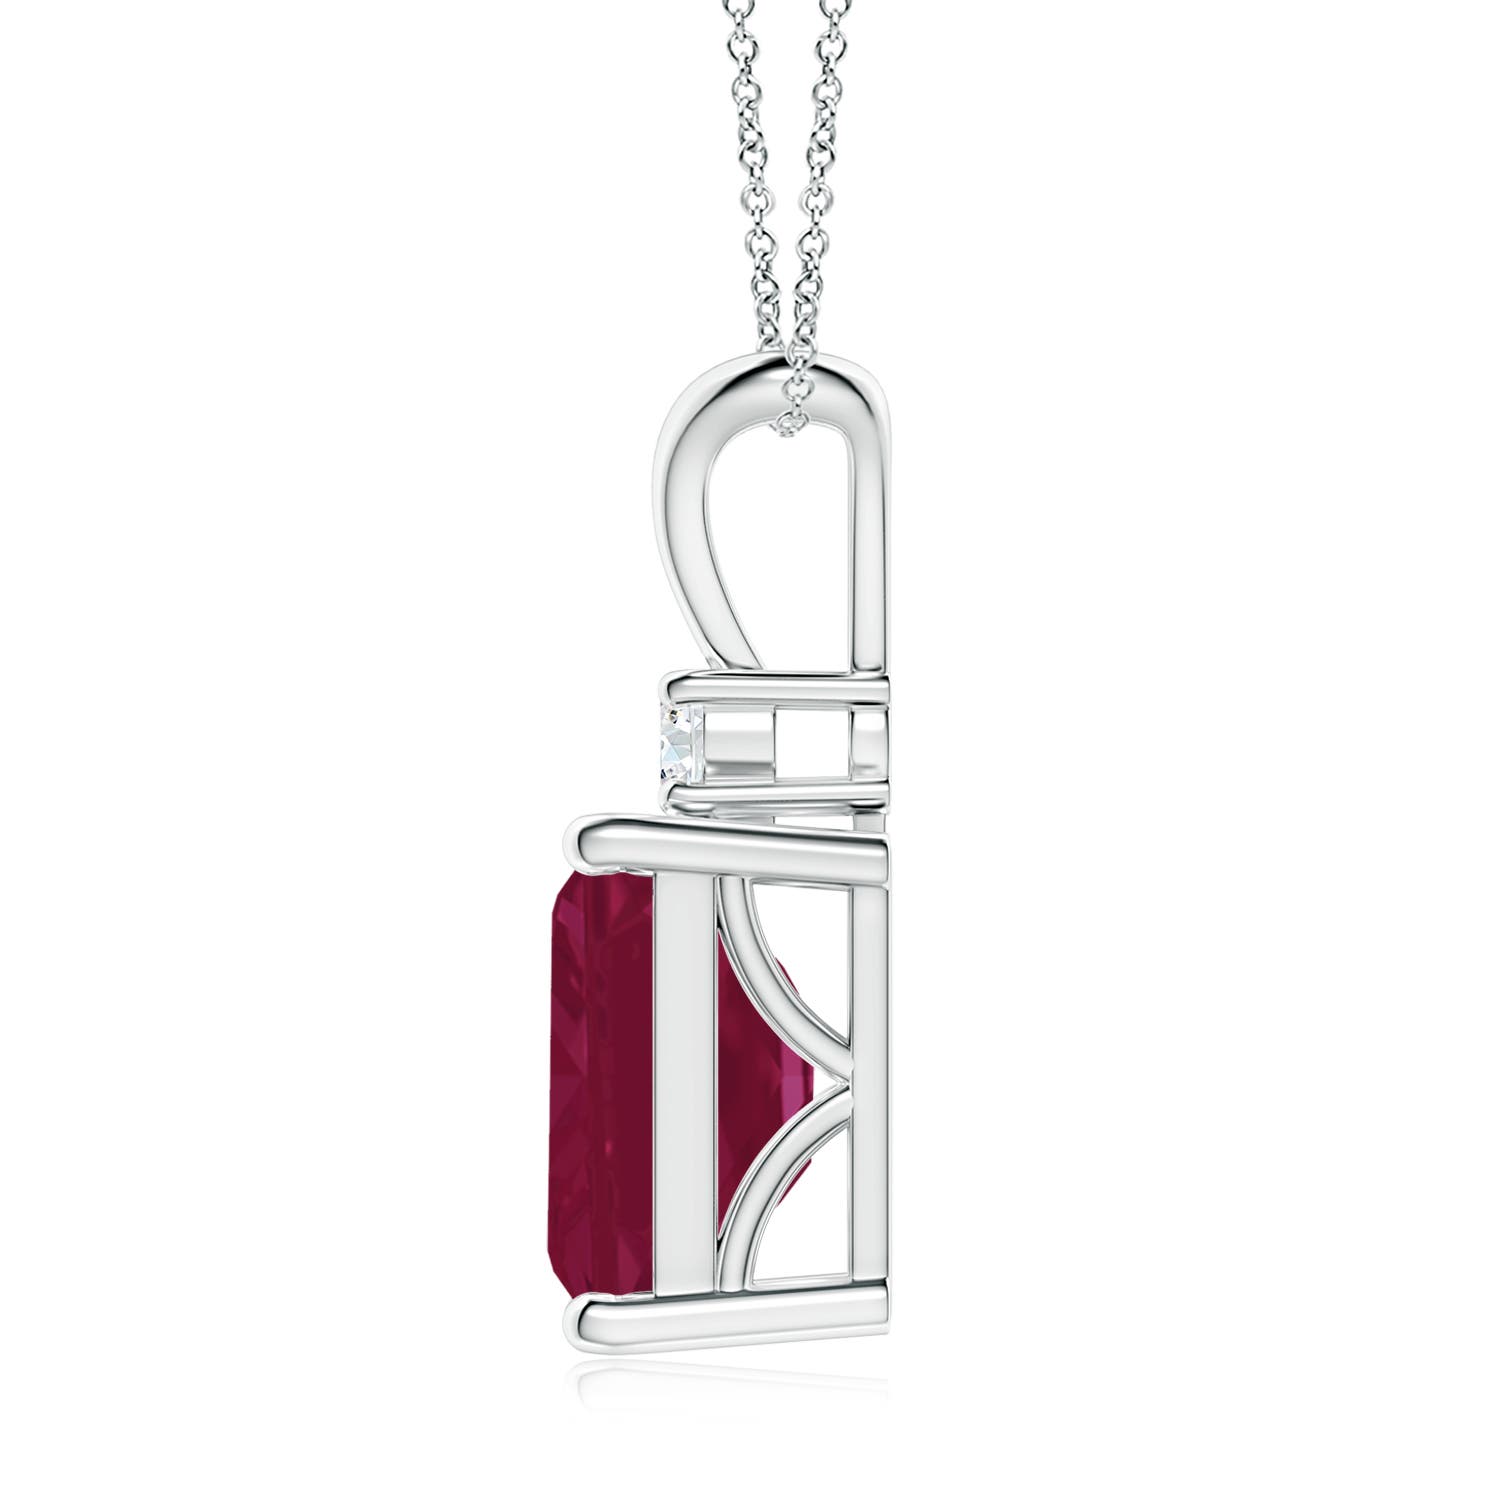 A - Ruby / 4.11 CT / 14 KT White Gold